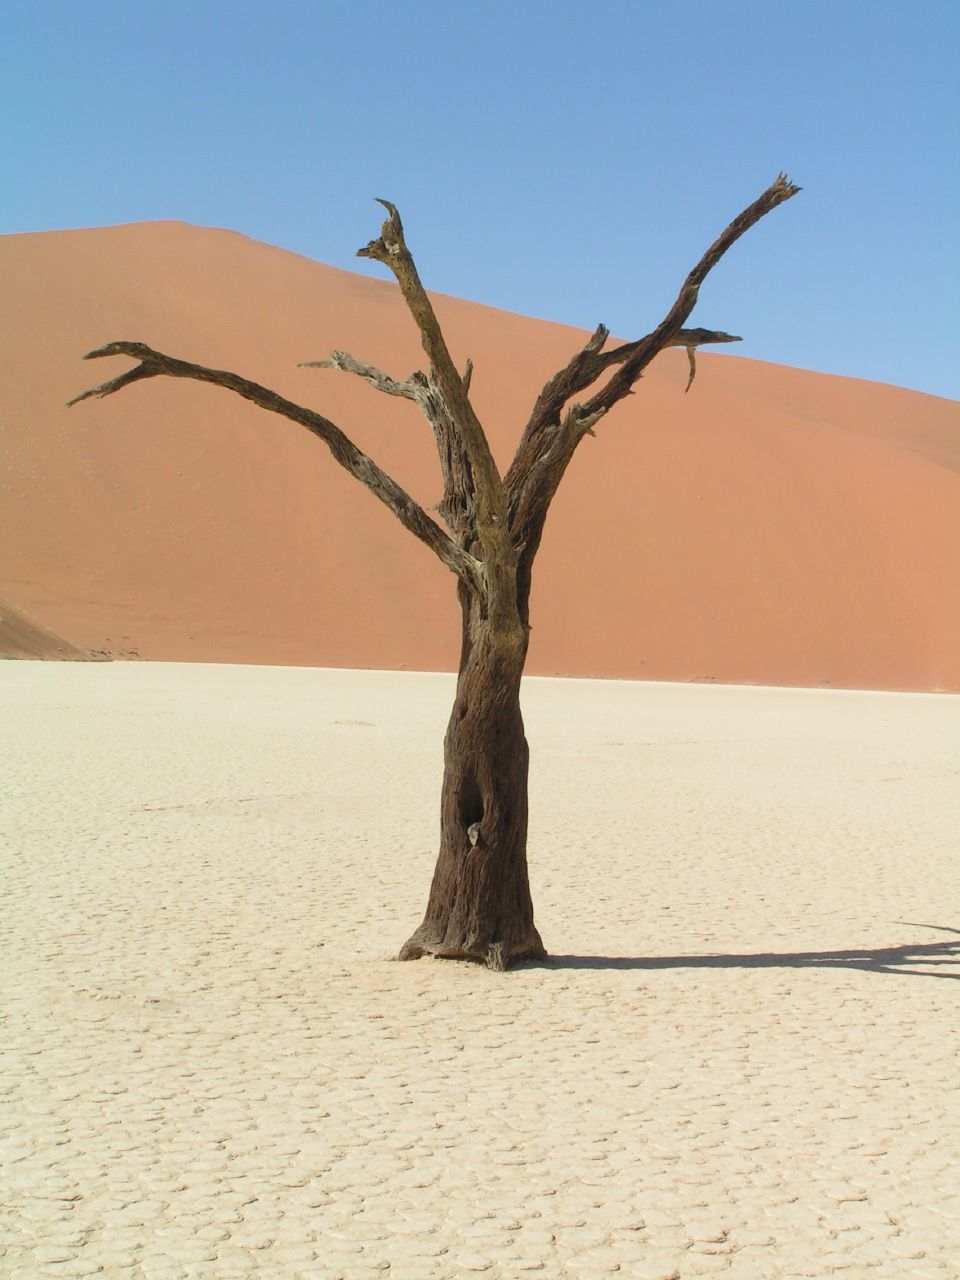 a bare tree standing in the desert with dunes in the background